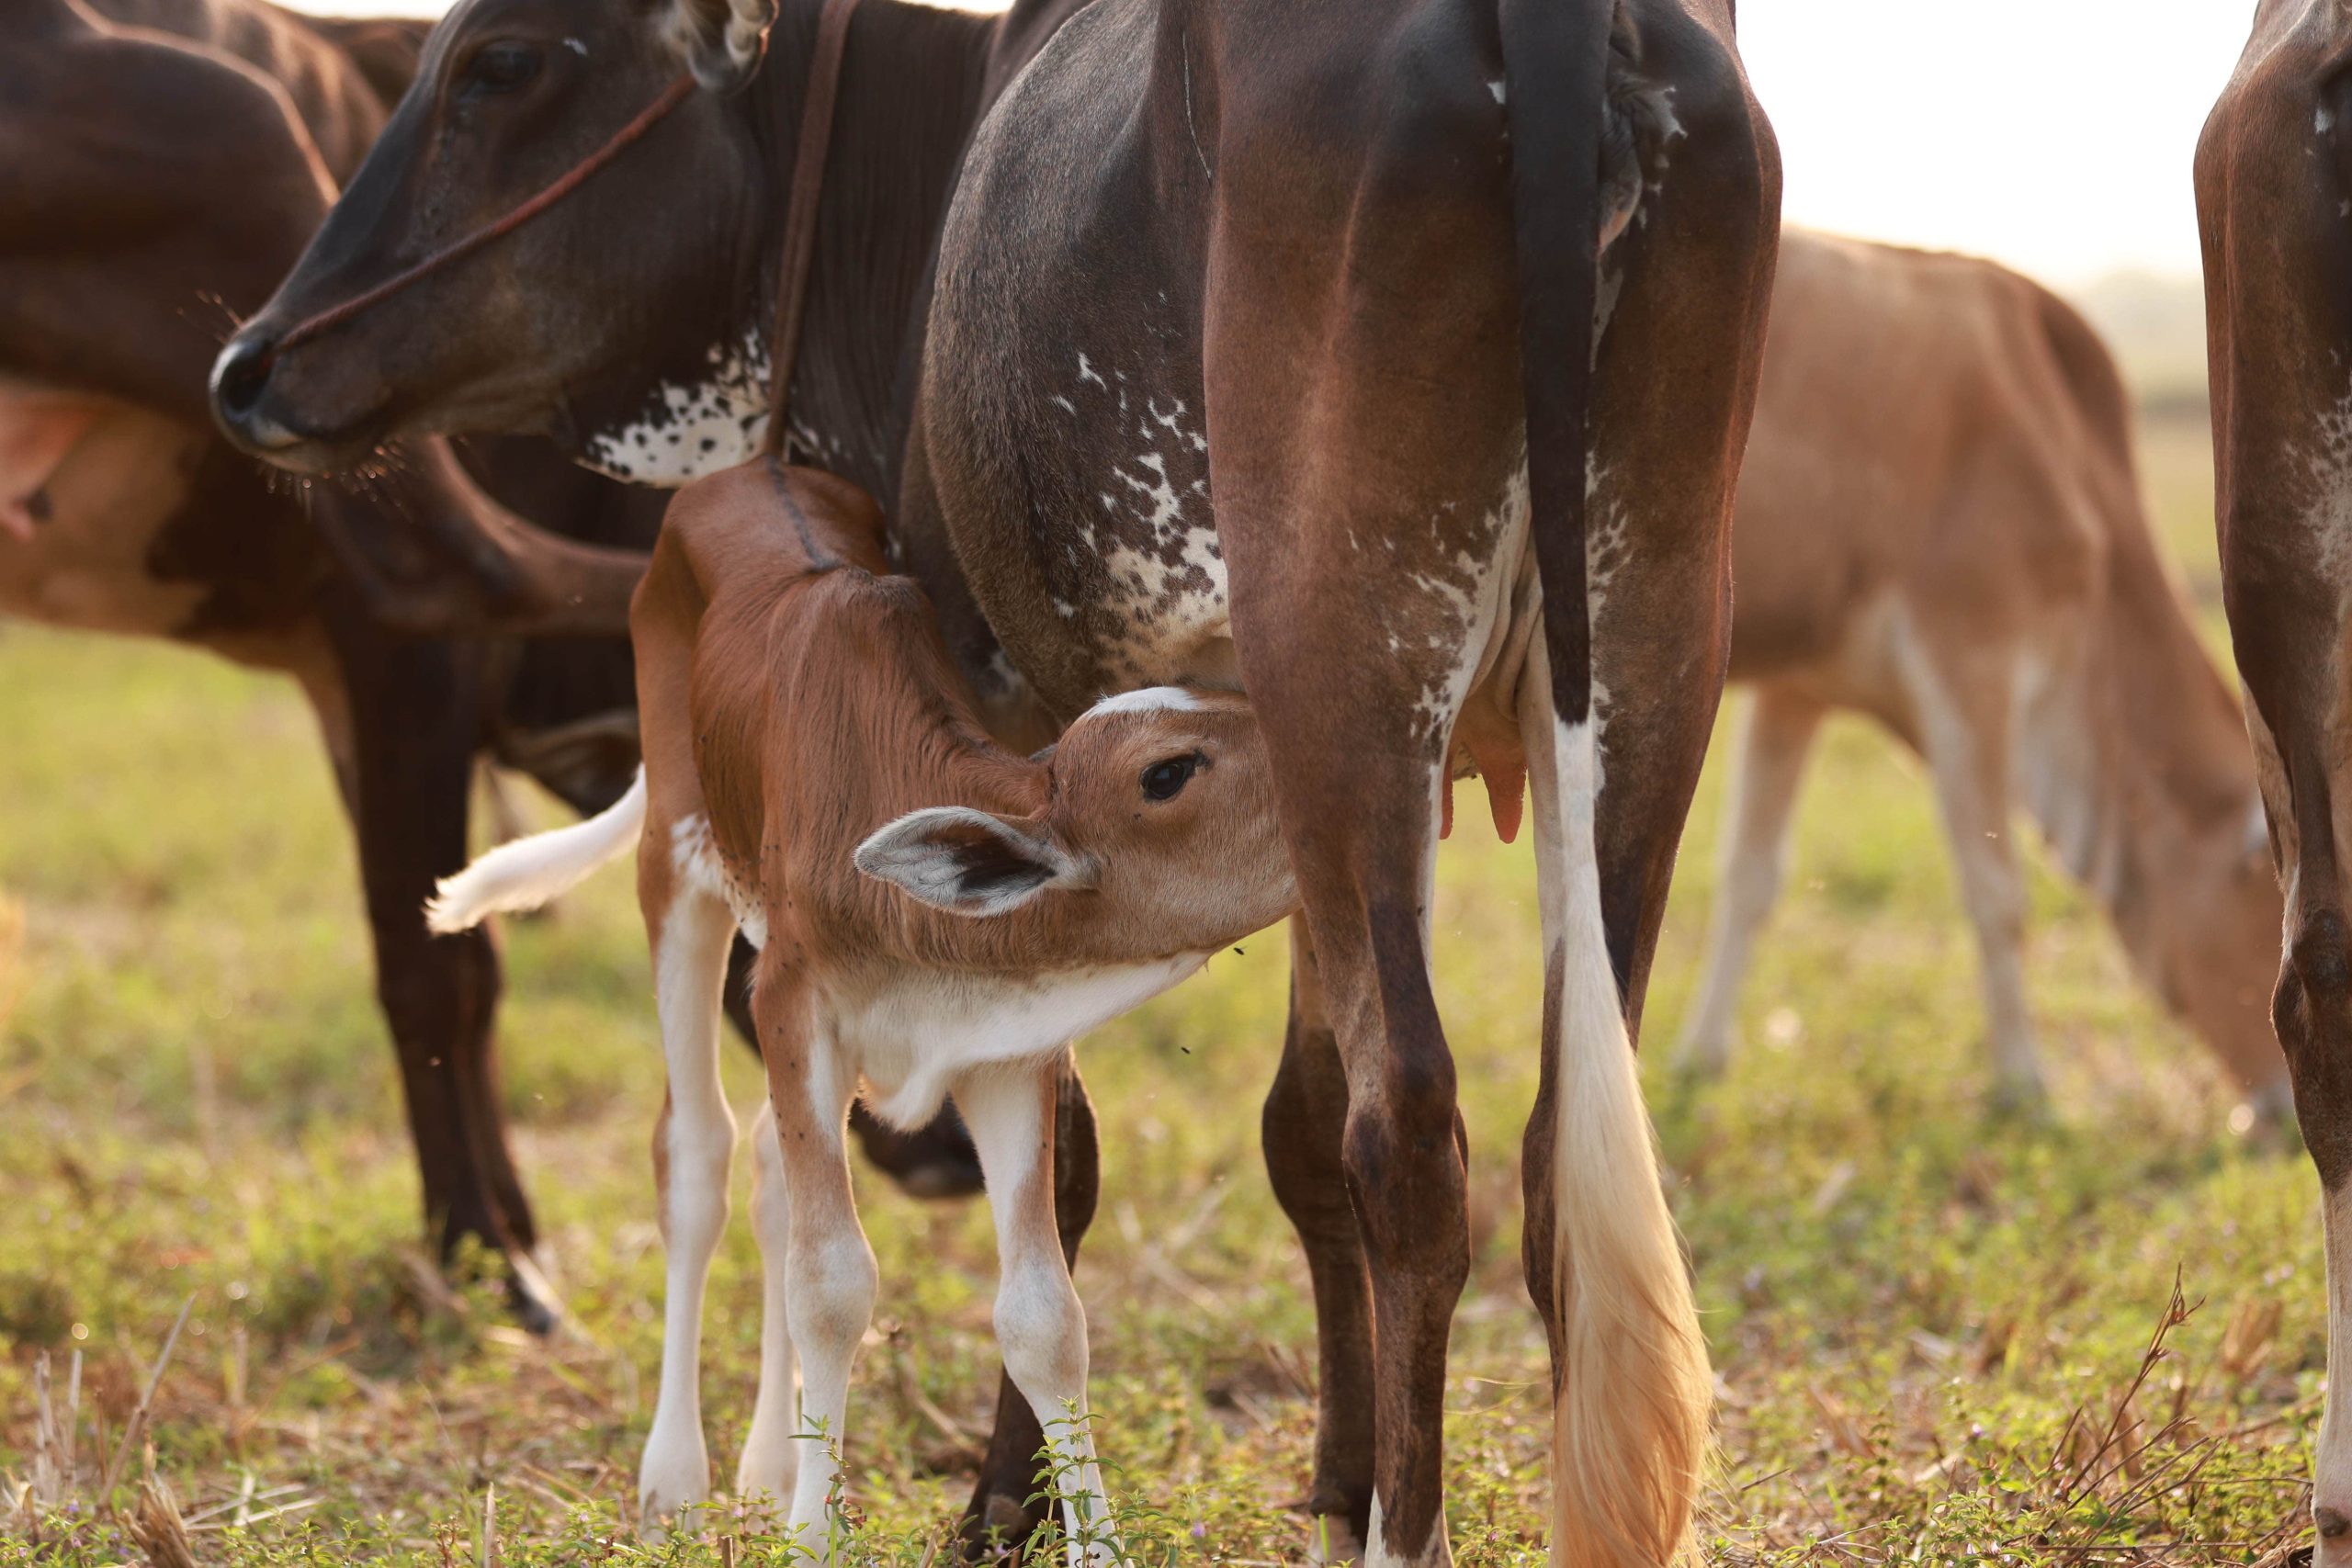 Why Native Breed Cows?